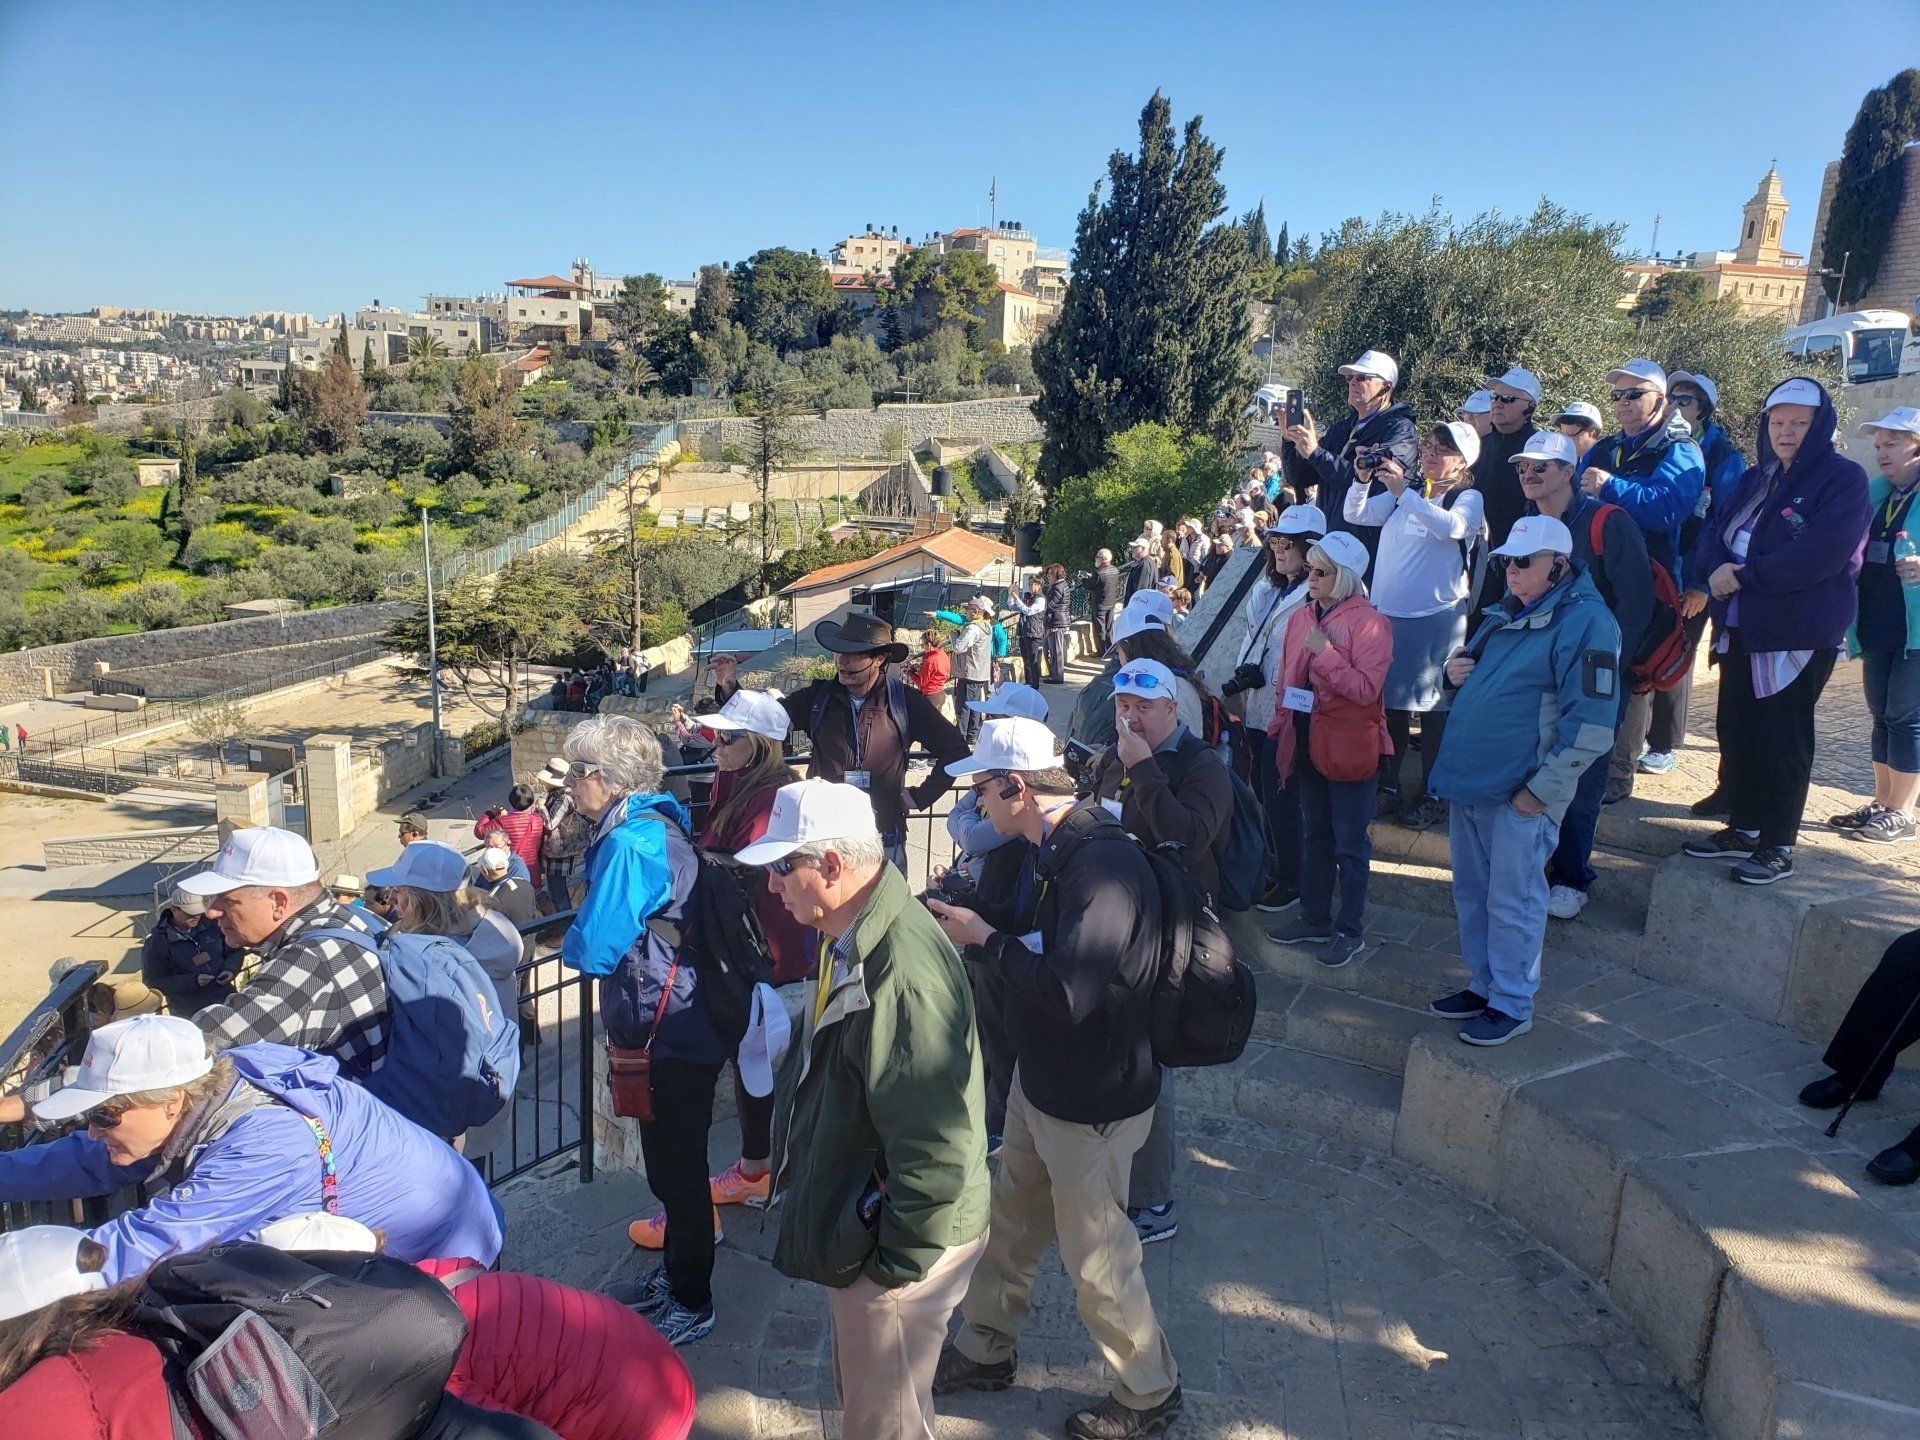 Holy Land pilgrimage overlooking the old city of Jerusalem from Mount of Olives.